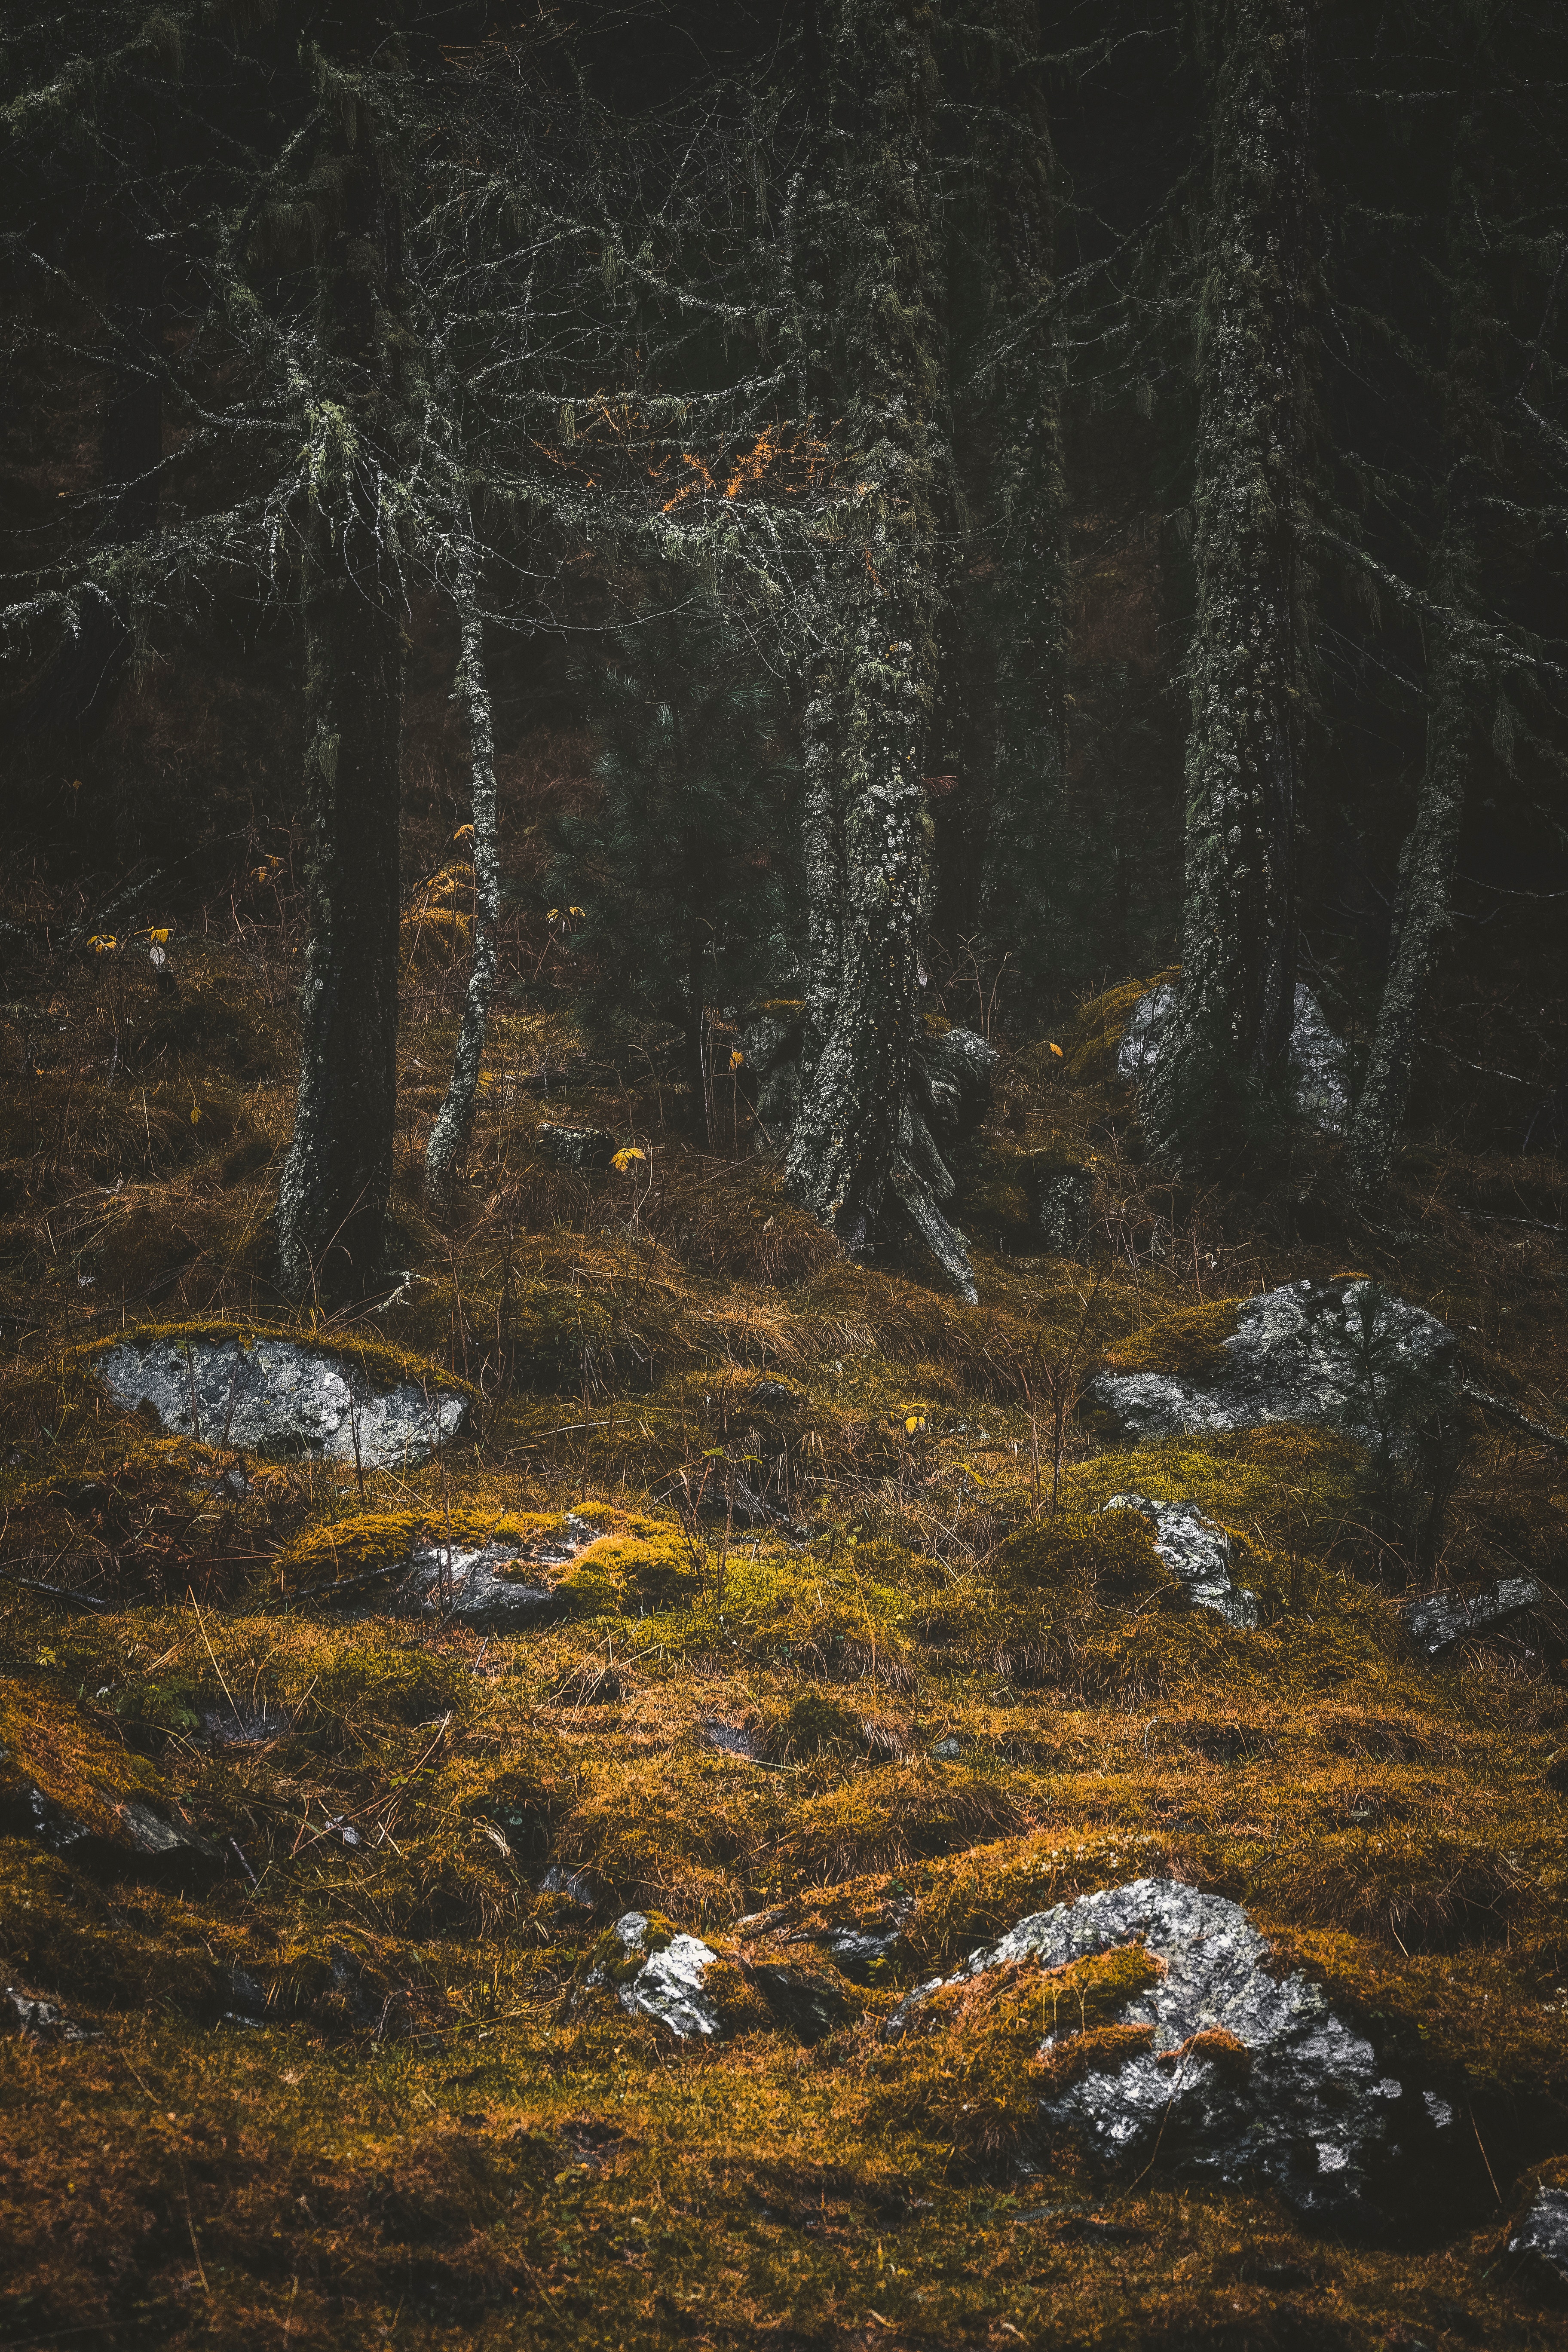 moss, nature, trees, stones, forest